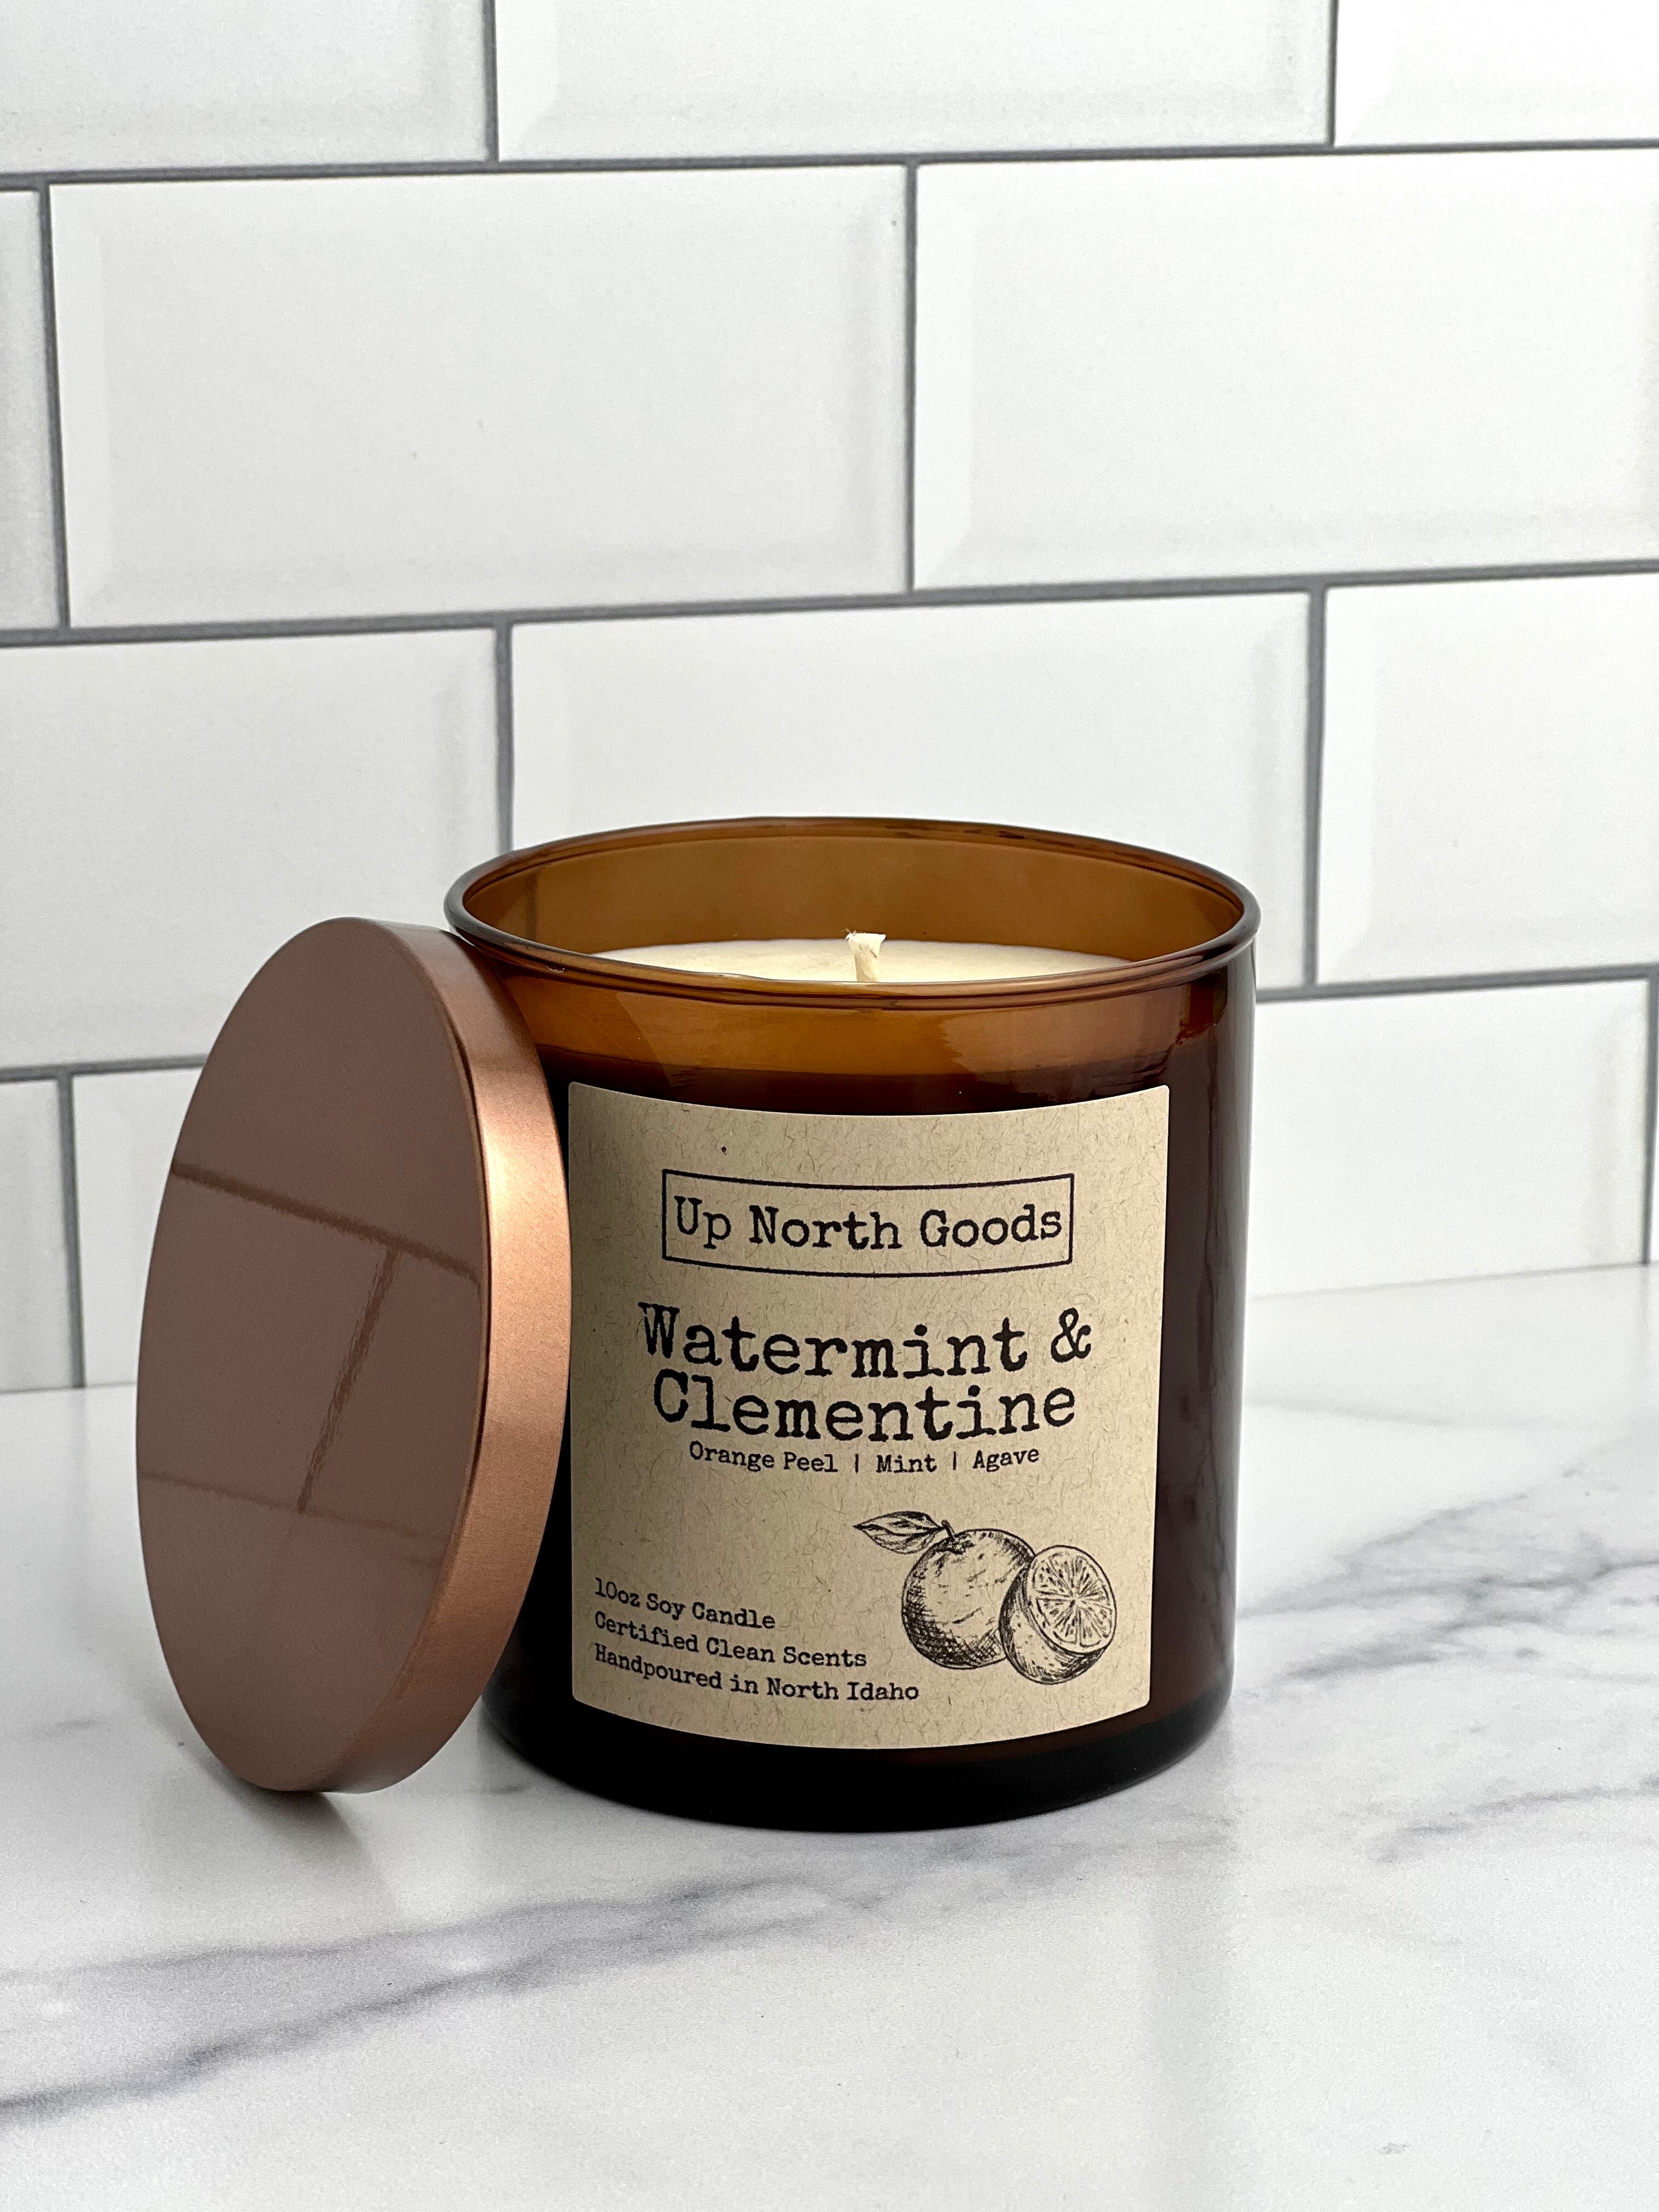 Watermint & Clementine Soy Candle